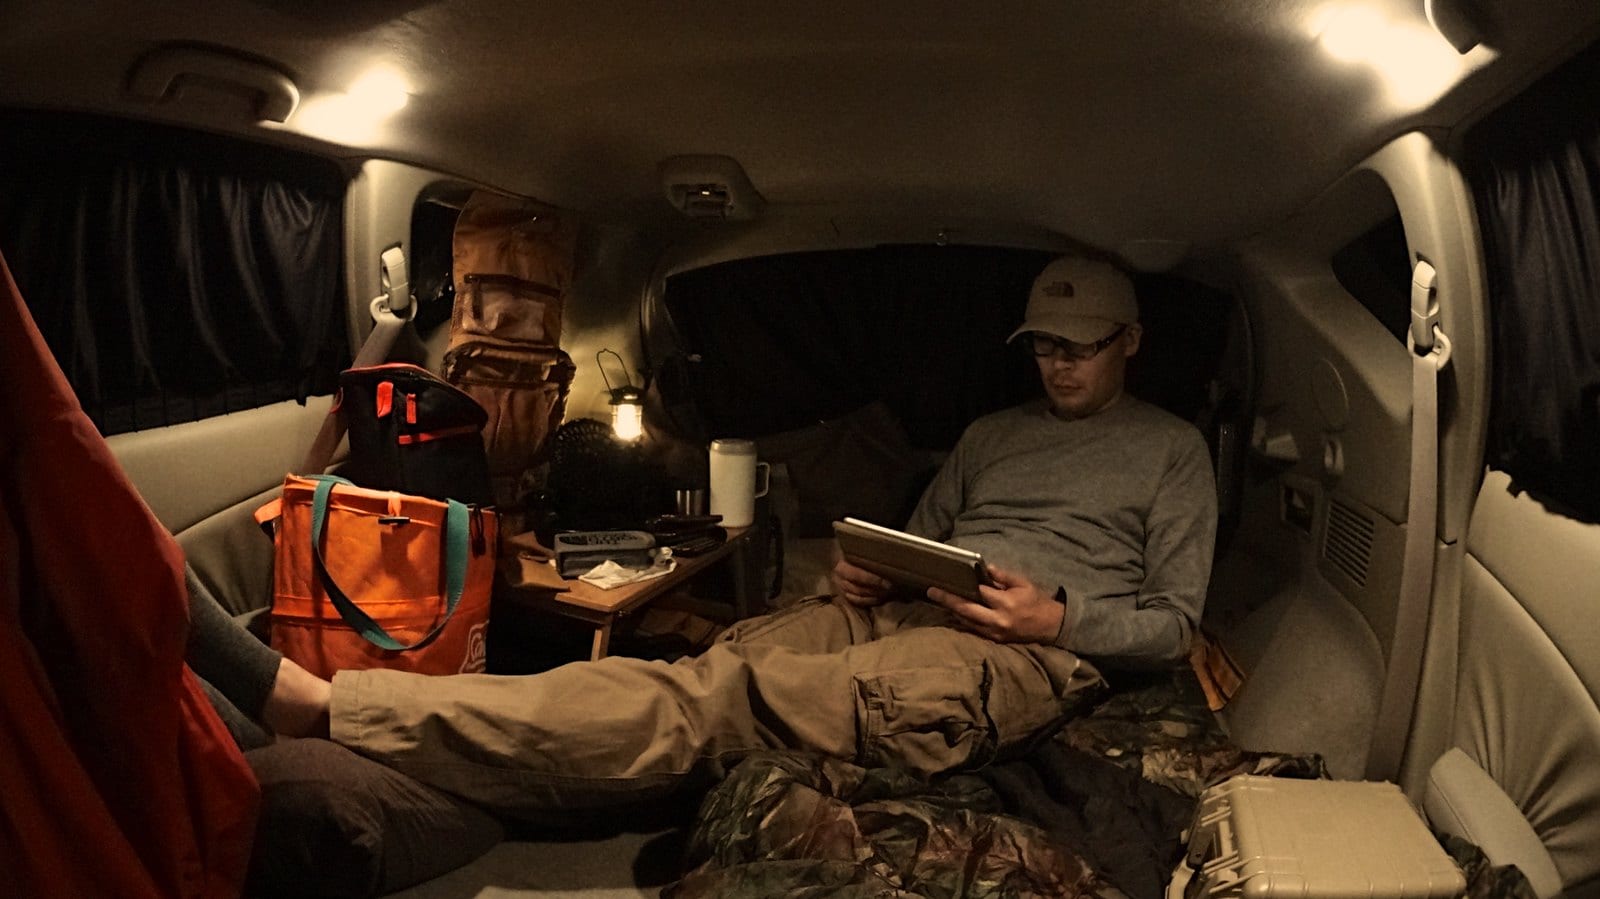 A young Asian man reclines while using an e-book reader in a comfortably furnished SUV.